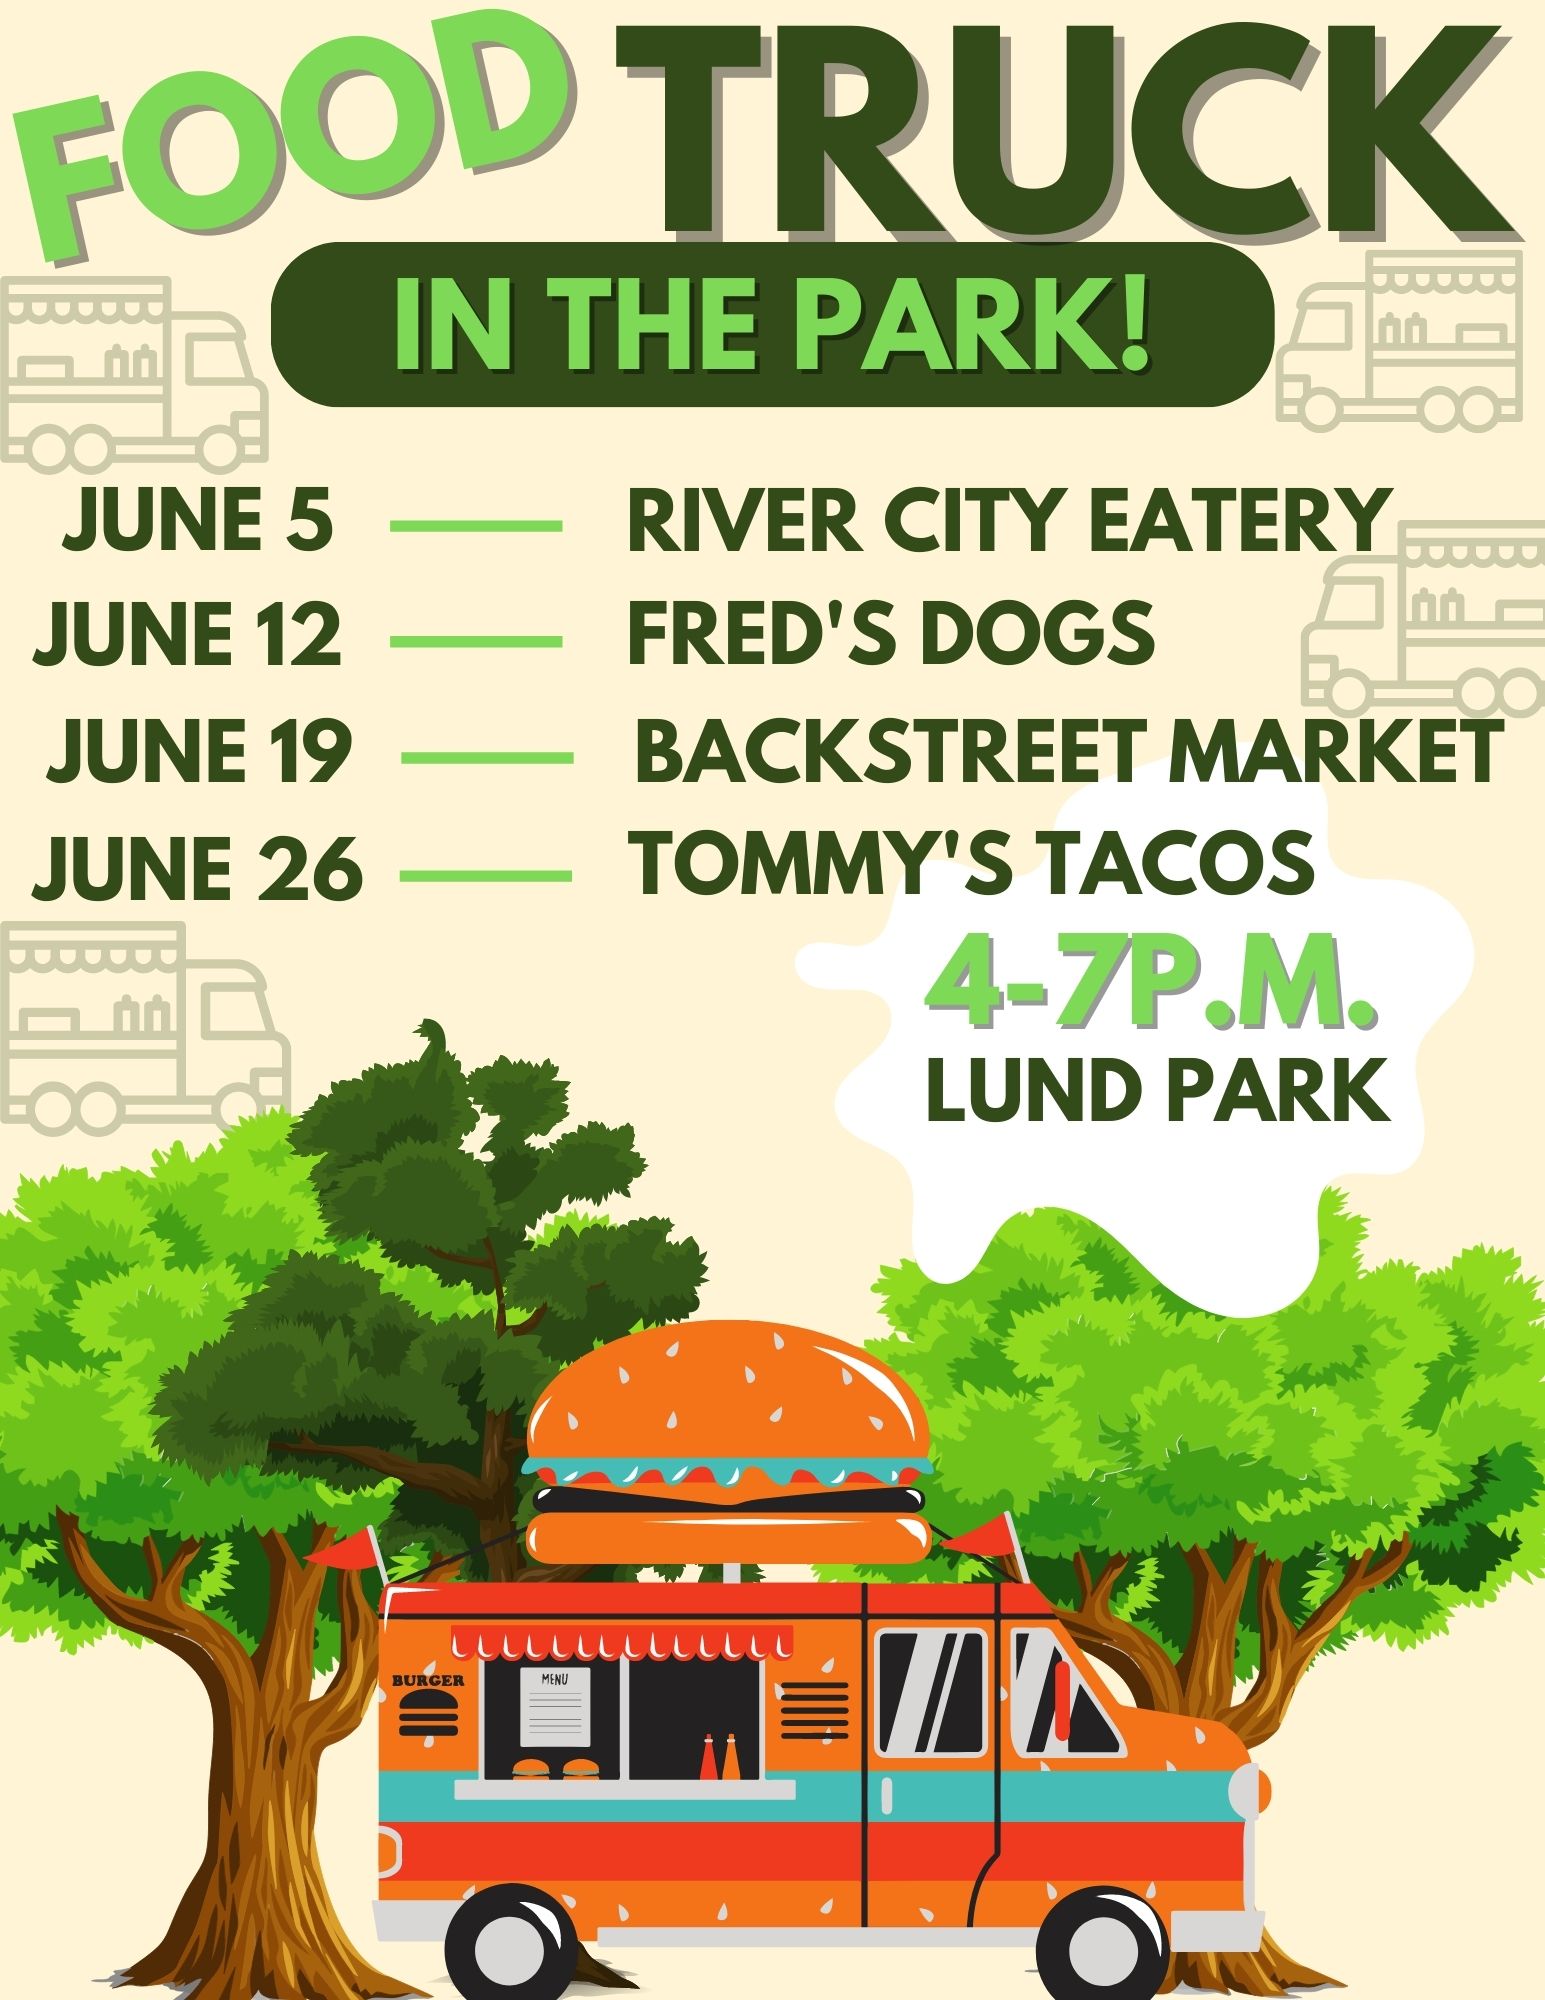 Information for Food Truck dates River City Eatery and Tommy's Tacos 